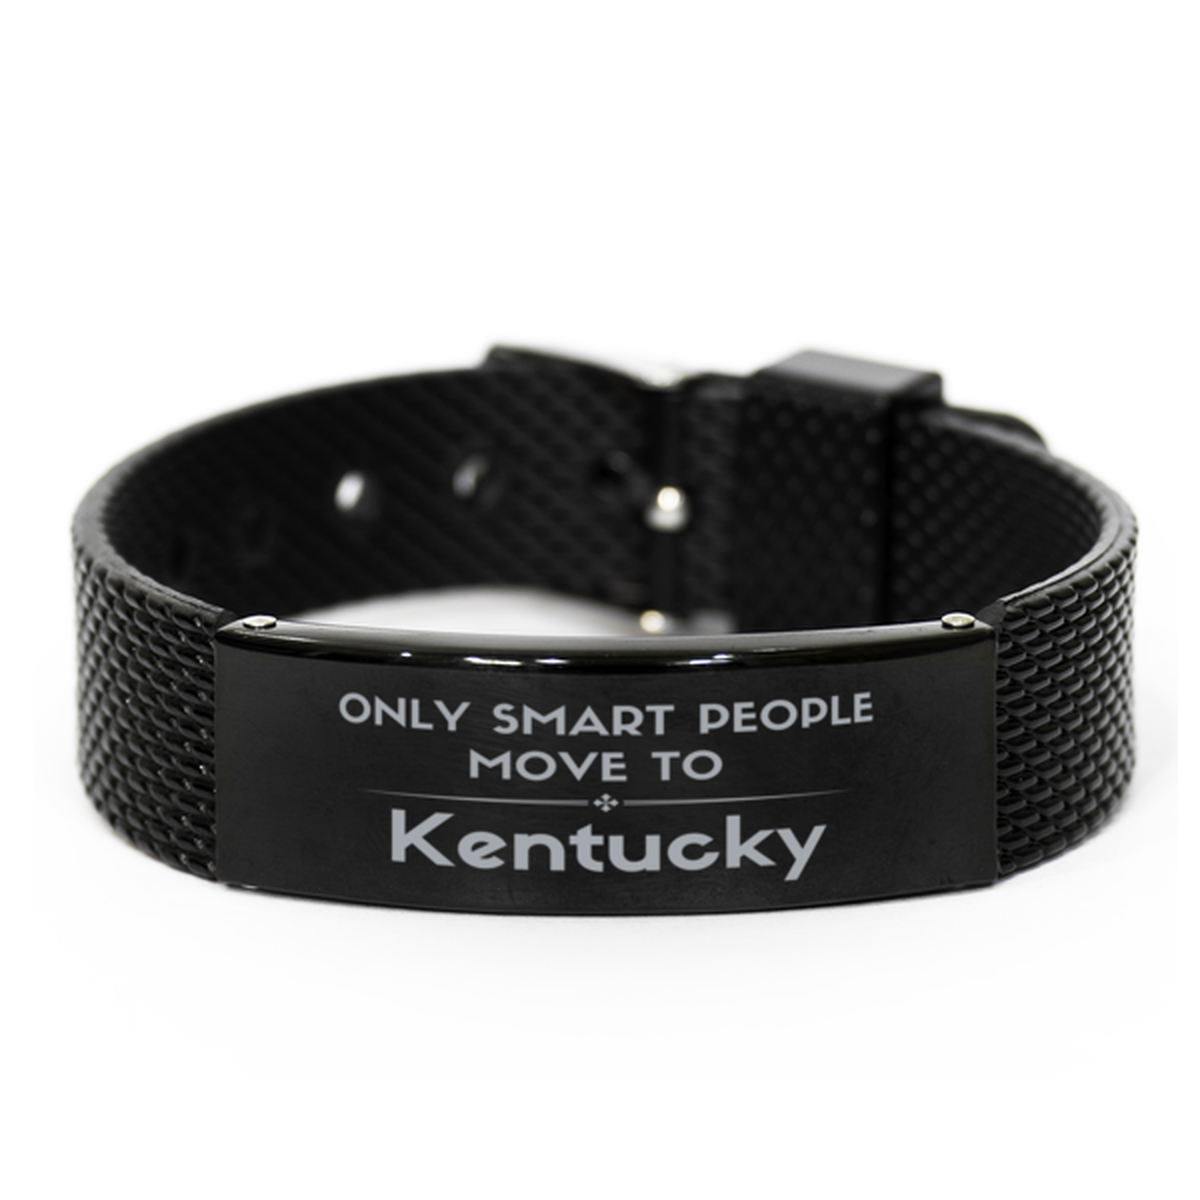 Only smart people move to Kentucky Black Shark Mesh Bracelet, Gag Gifts For Kentucky, Move to Kentucky Gifts for Friends Coworker Funny Saying Quote